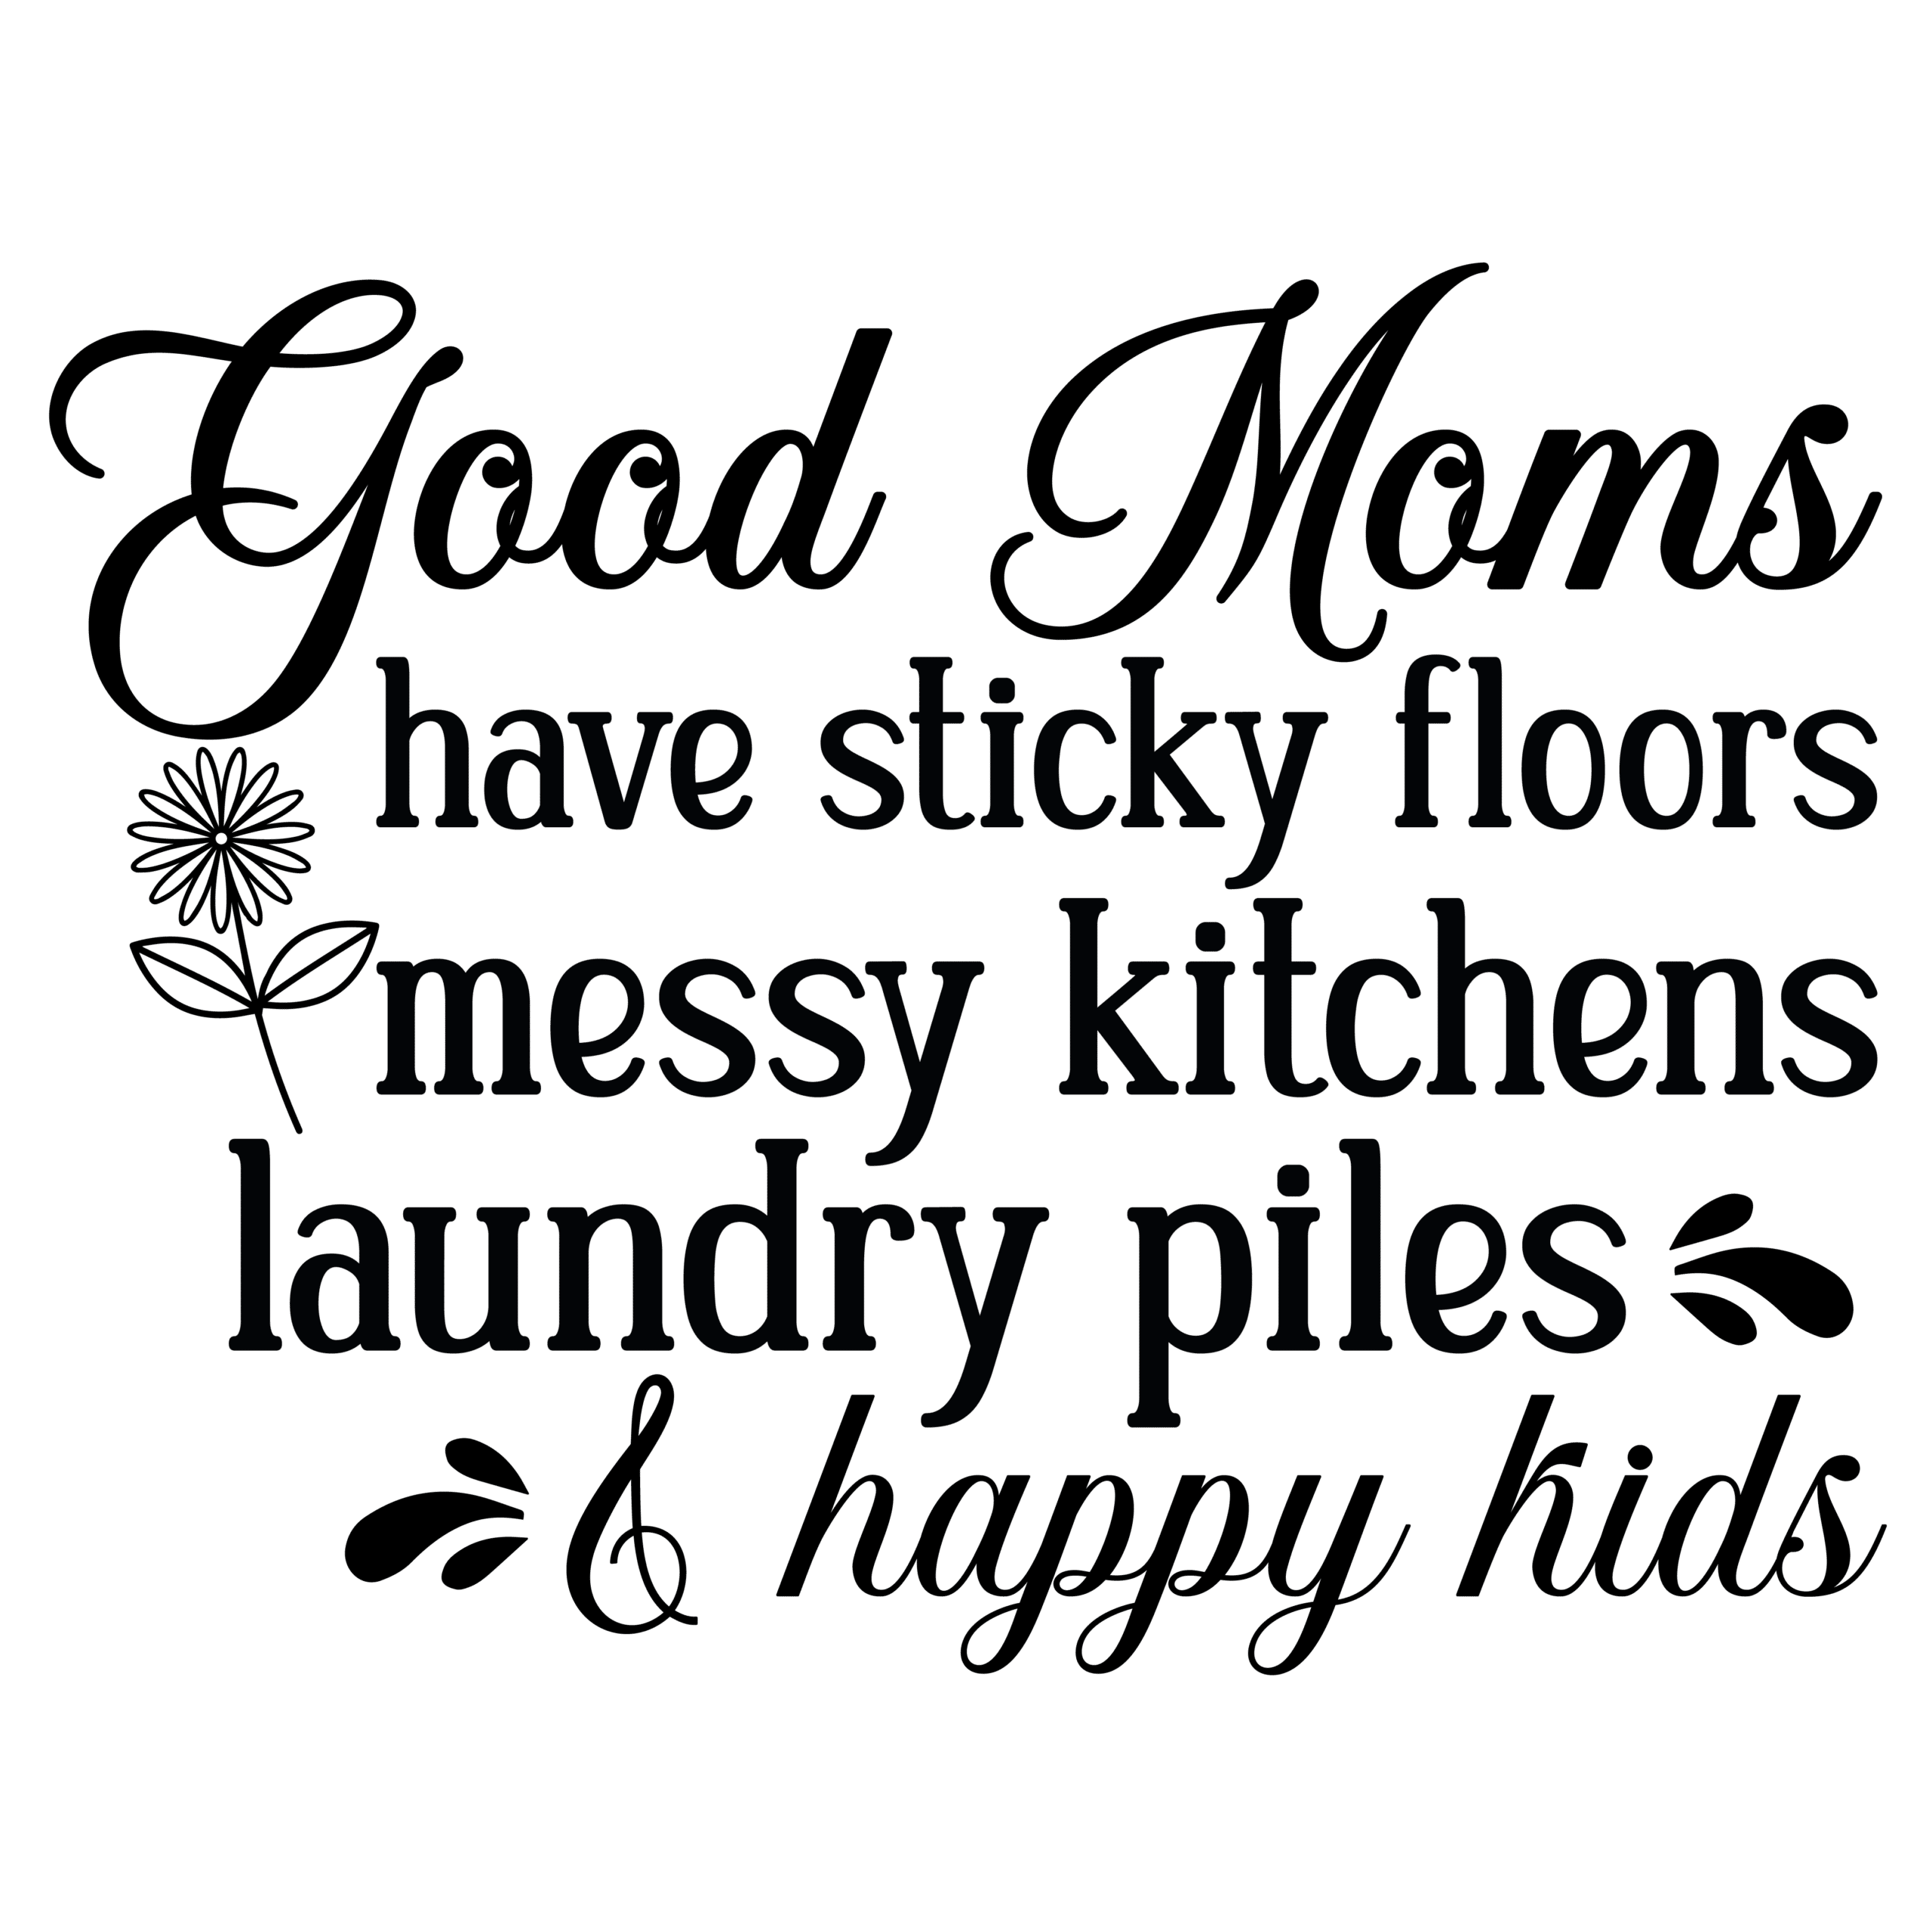 Good moms have sticky floors messy kitchens laundry piles and happy kids-01